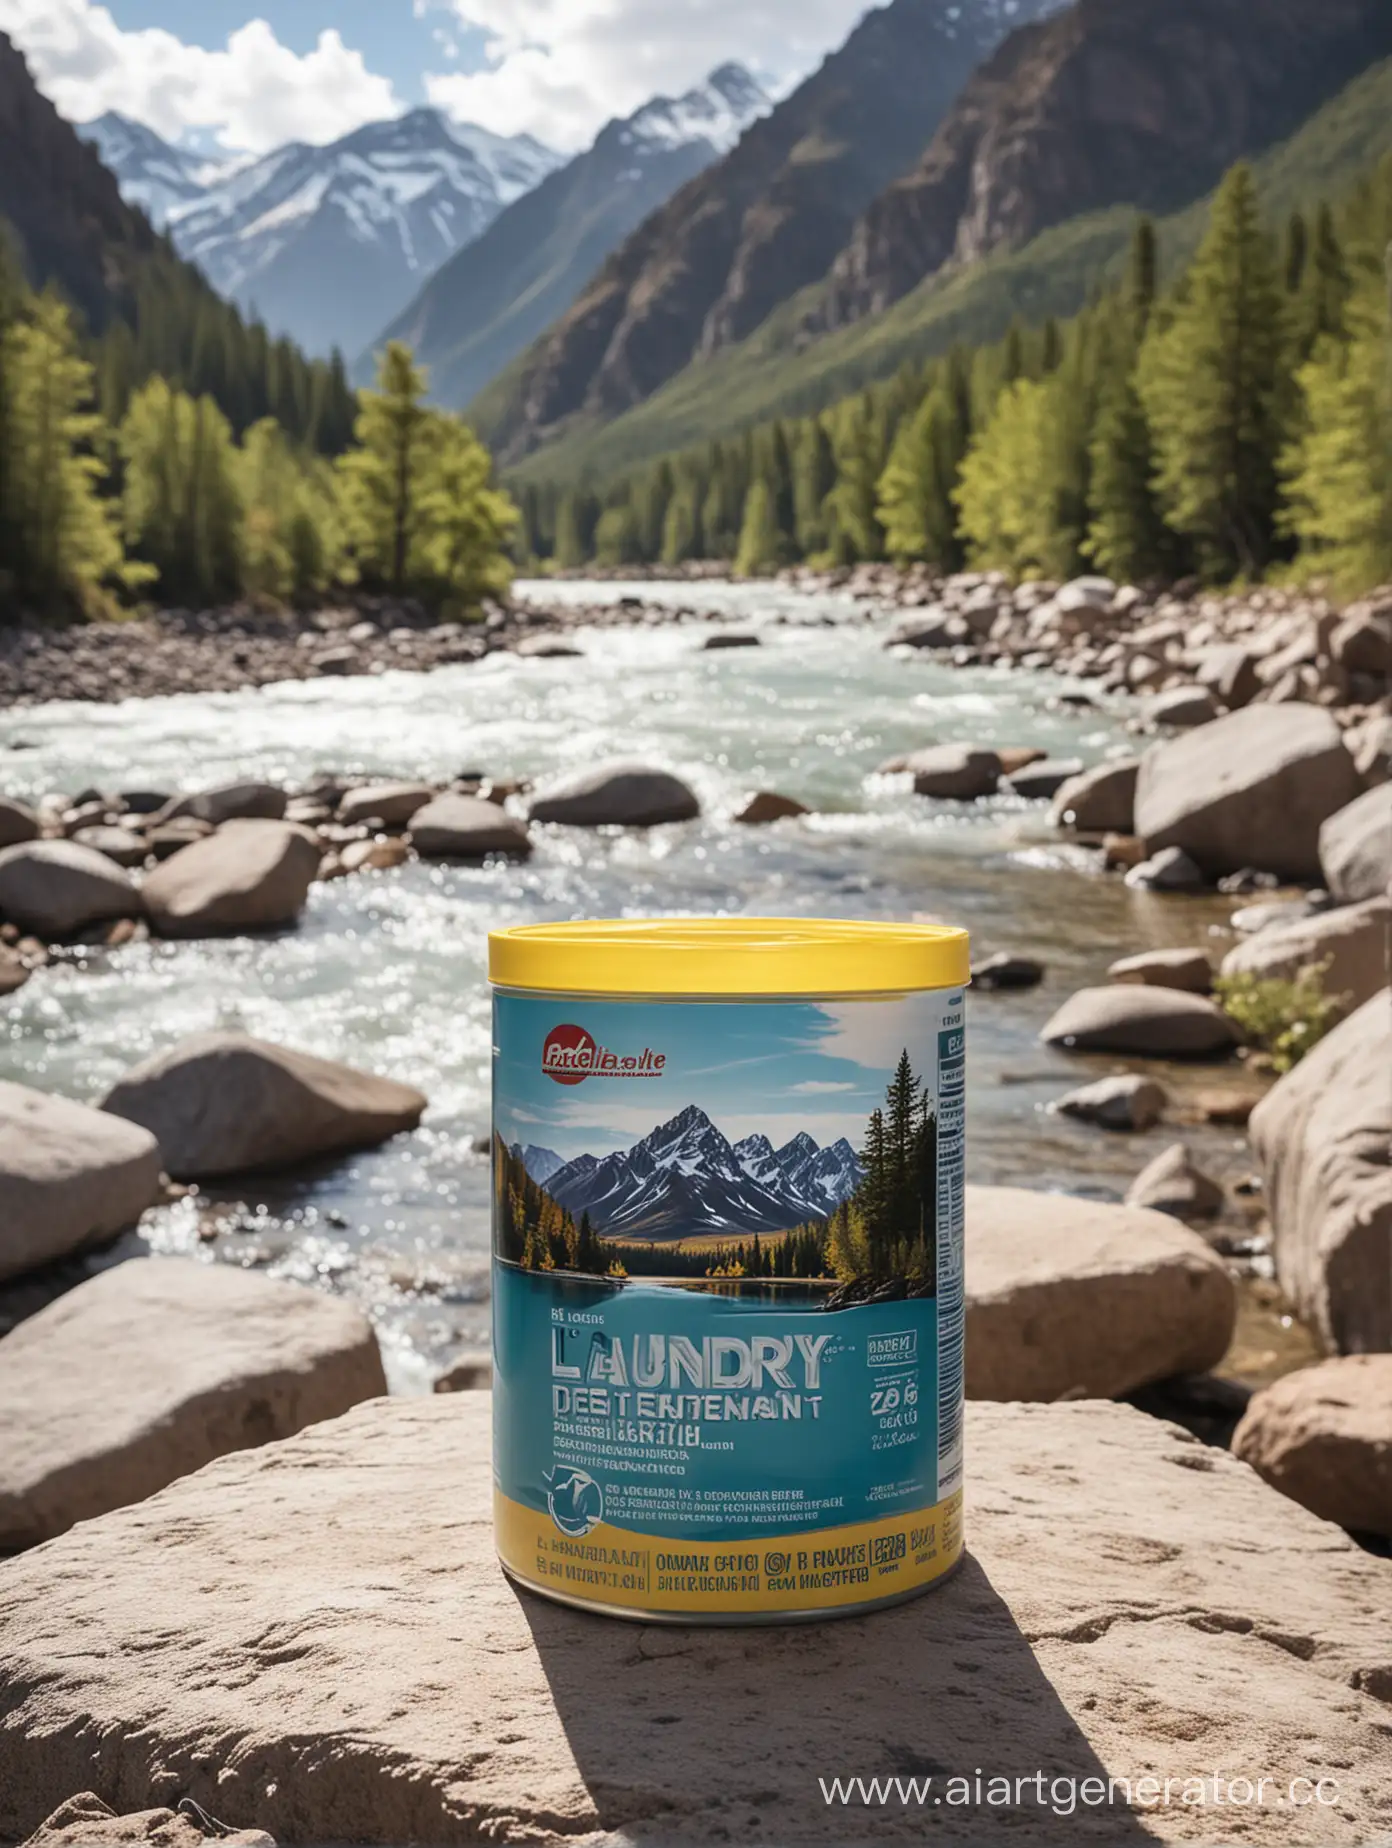 Laundry-Detergent-Canister-on-Mountainous-Riverbank